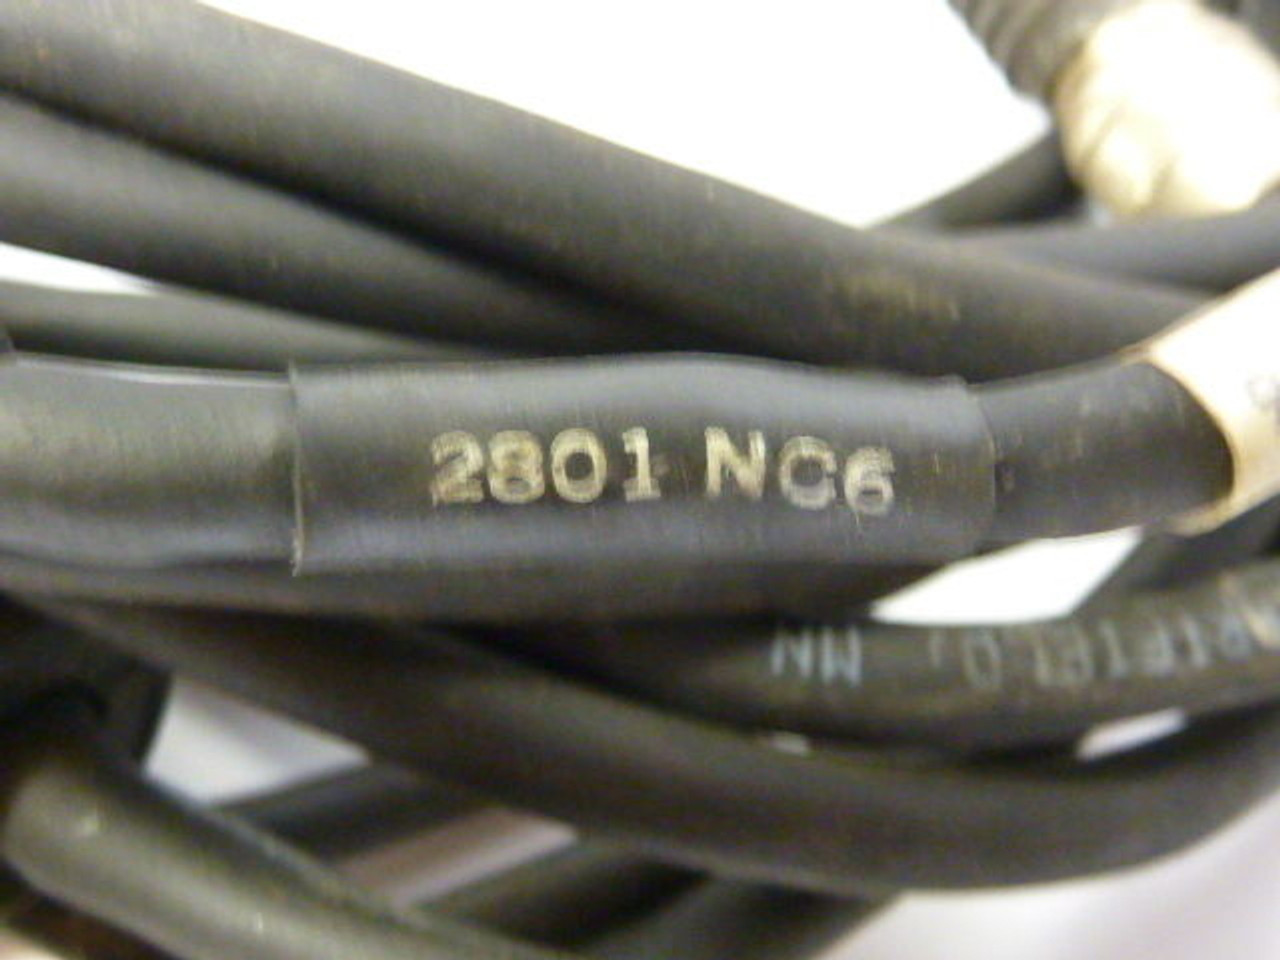 Allen-Bradley 2801-NC6 Camera Cable USED